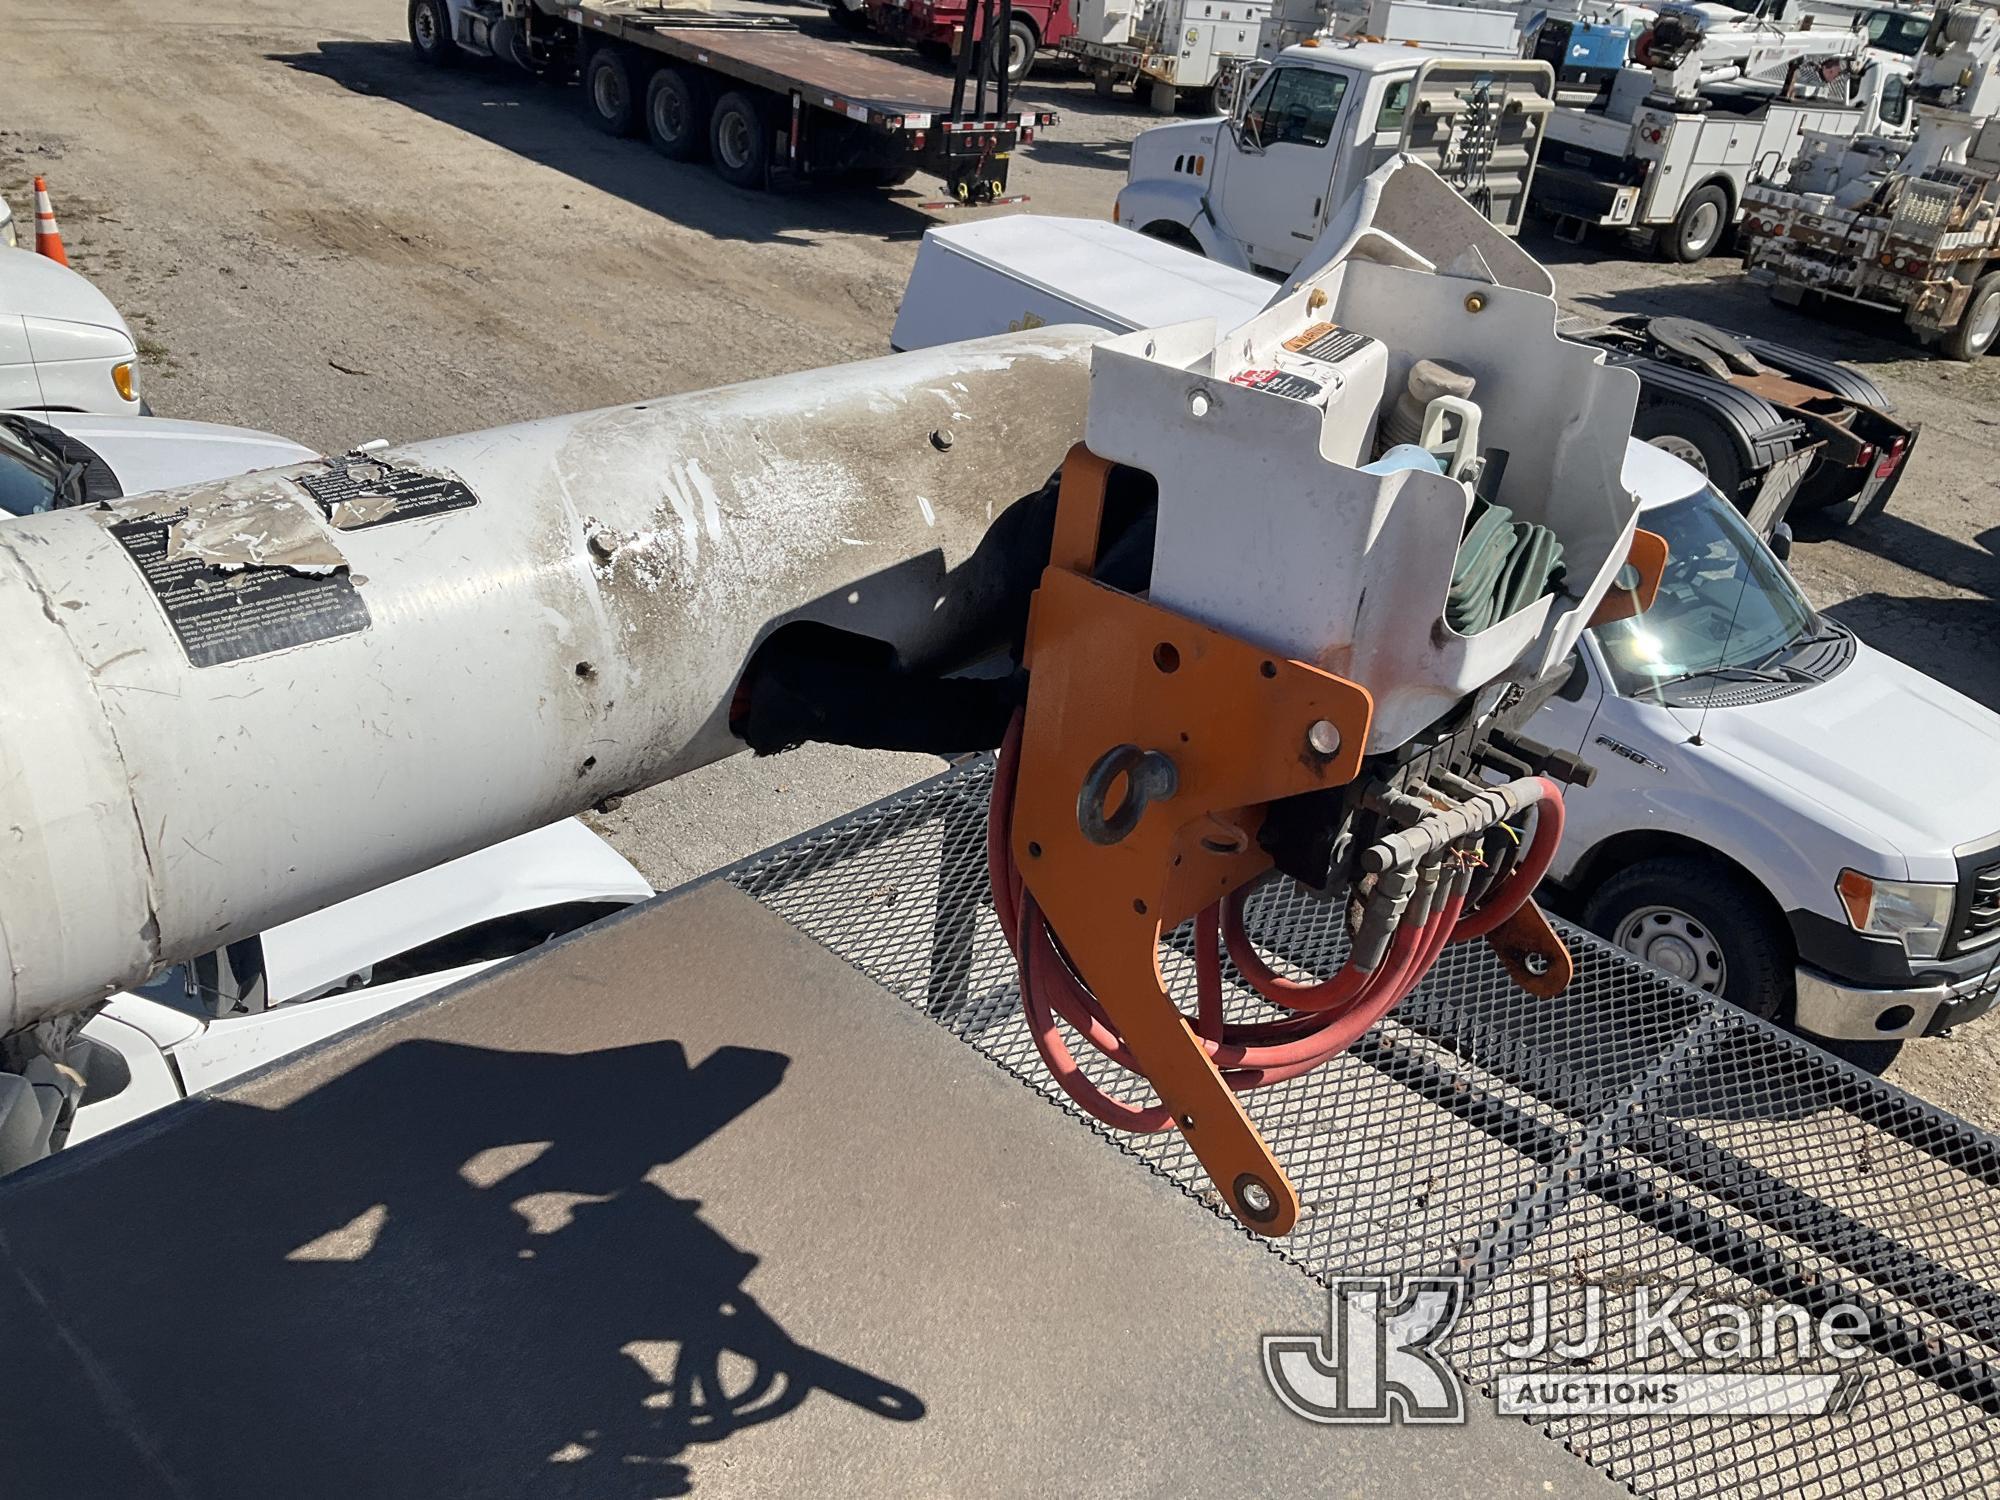 (Kansas City, MO) Altec LRV 55, Over-Center Bucket Truck mounted behind cab on 2006 GMC C7500 Chippe